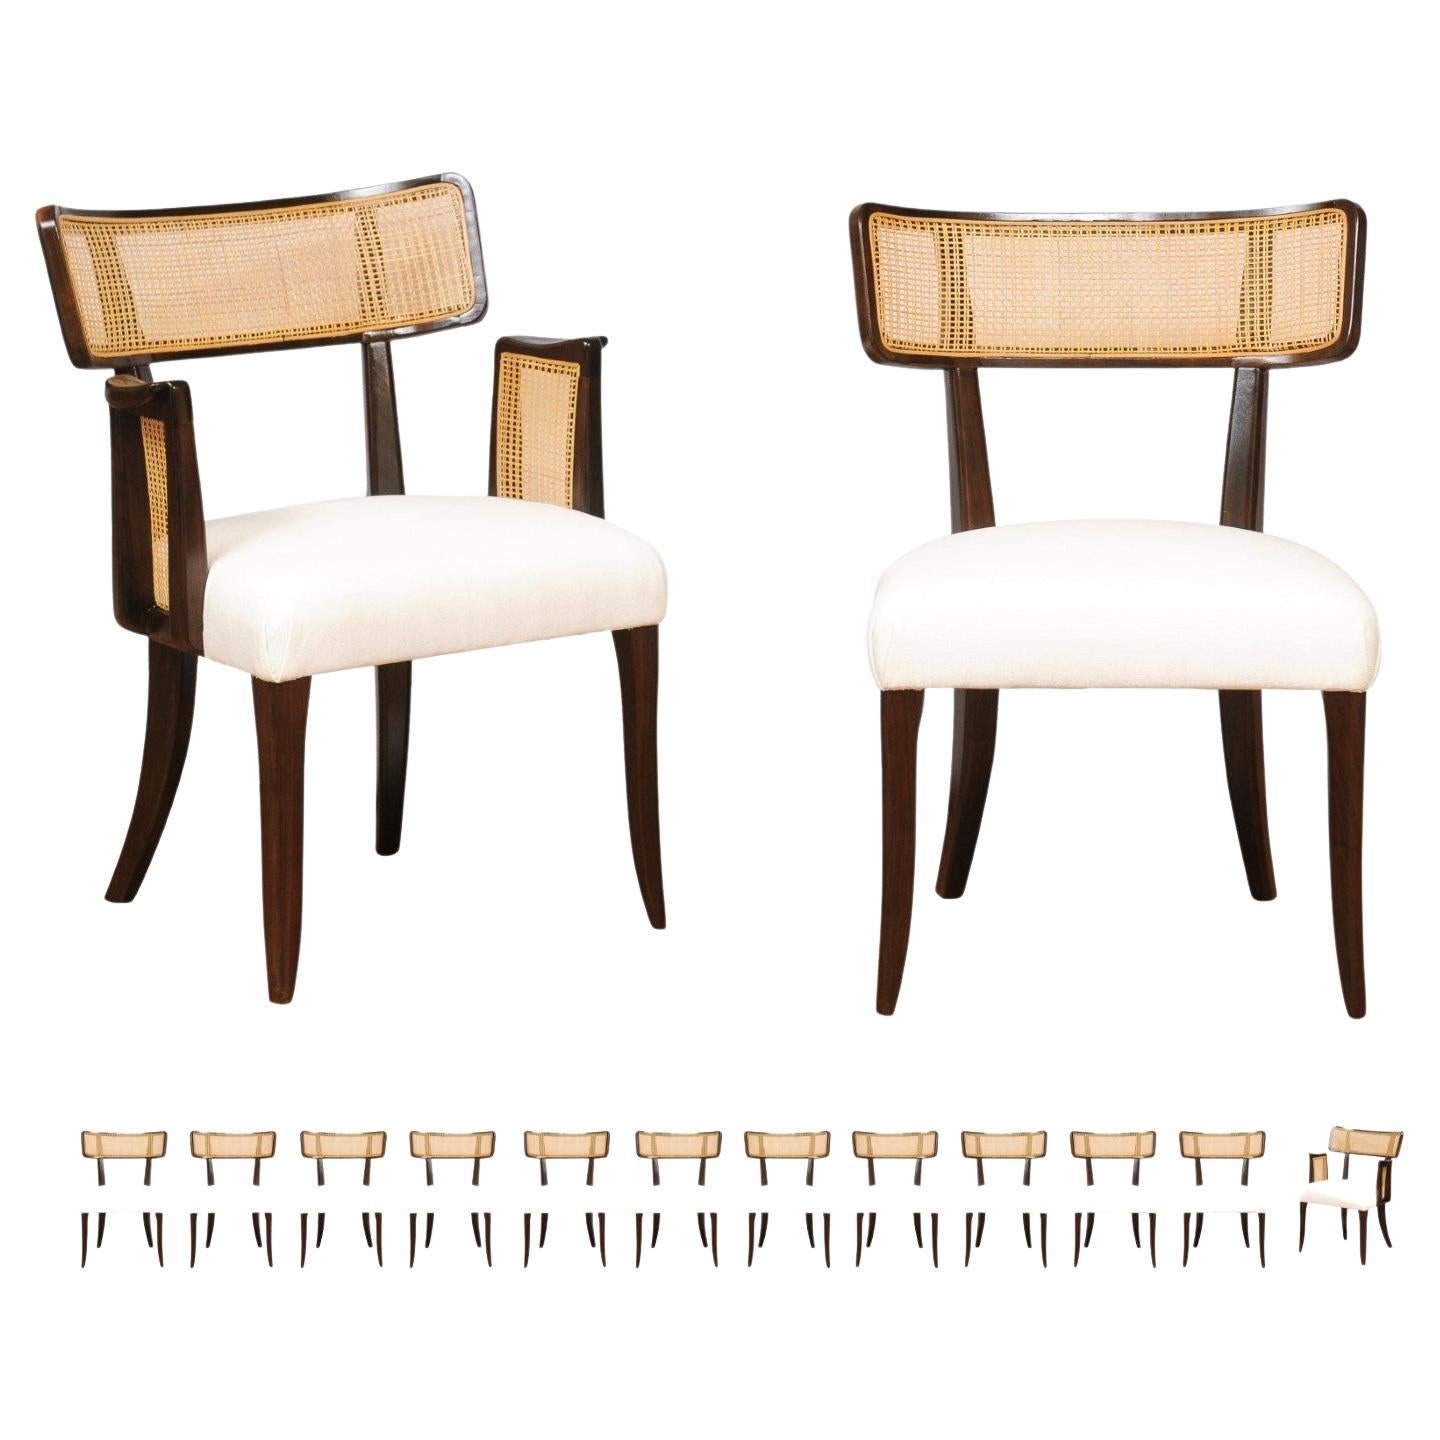 Remarkable Set of 14 Klismos Cane Dining Chairs by Edward Wormley, circa 1948 For Sale